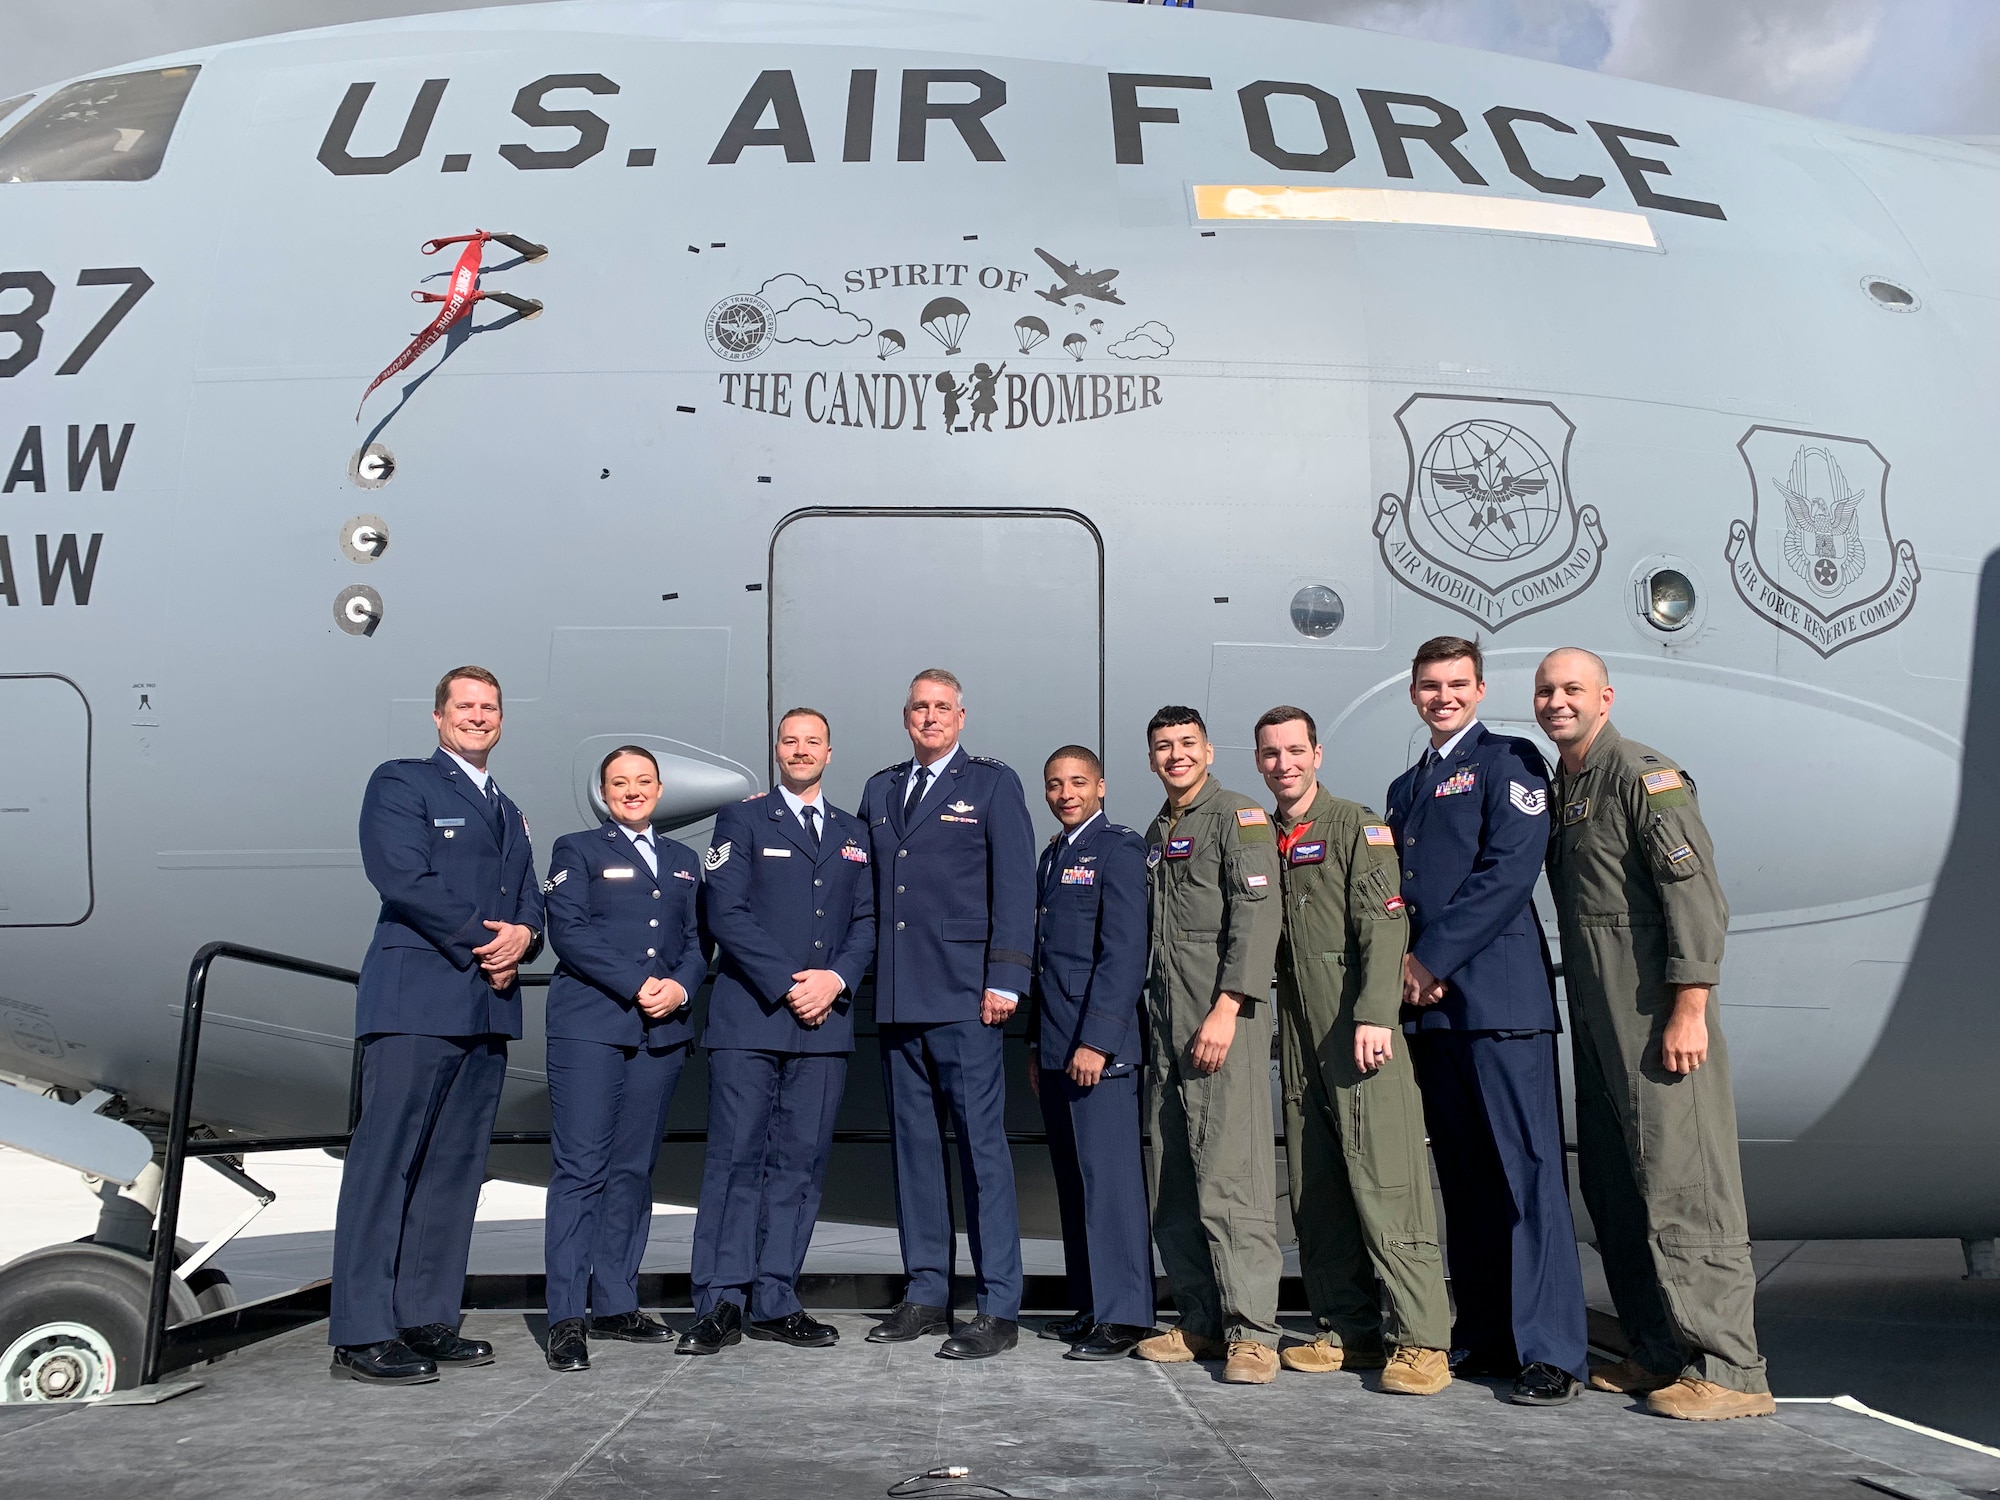 U.S. Air Force Gen Mike Minihan, Air Mobility Command commander, stand with the crew of the C-17 Globemaster III  that was renamed to "Spirit of the Candy Bomber" in Provo, Utah, May 20, 2022.